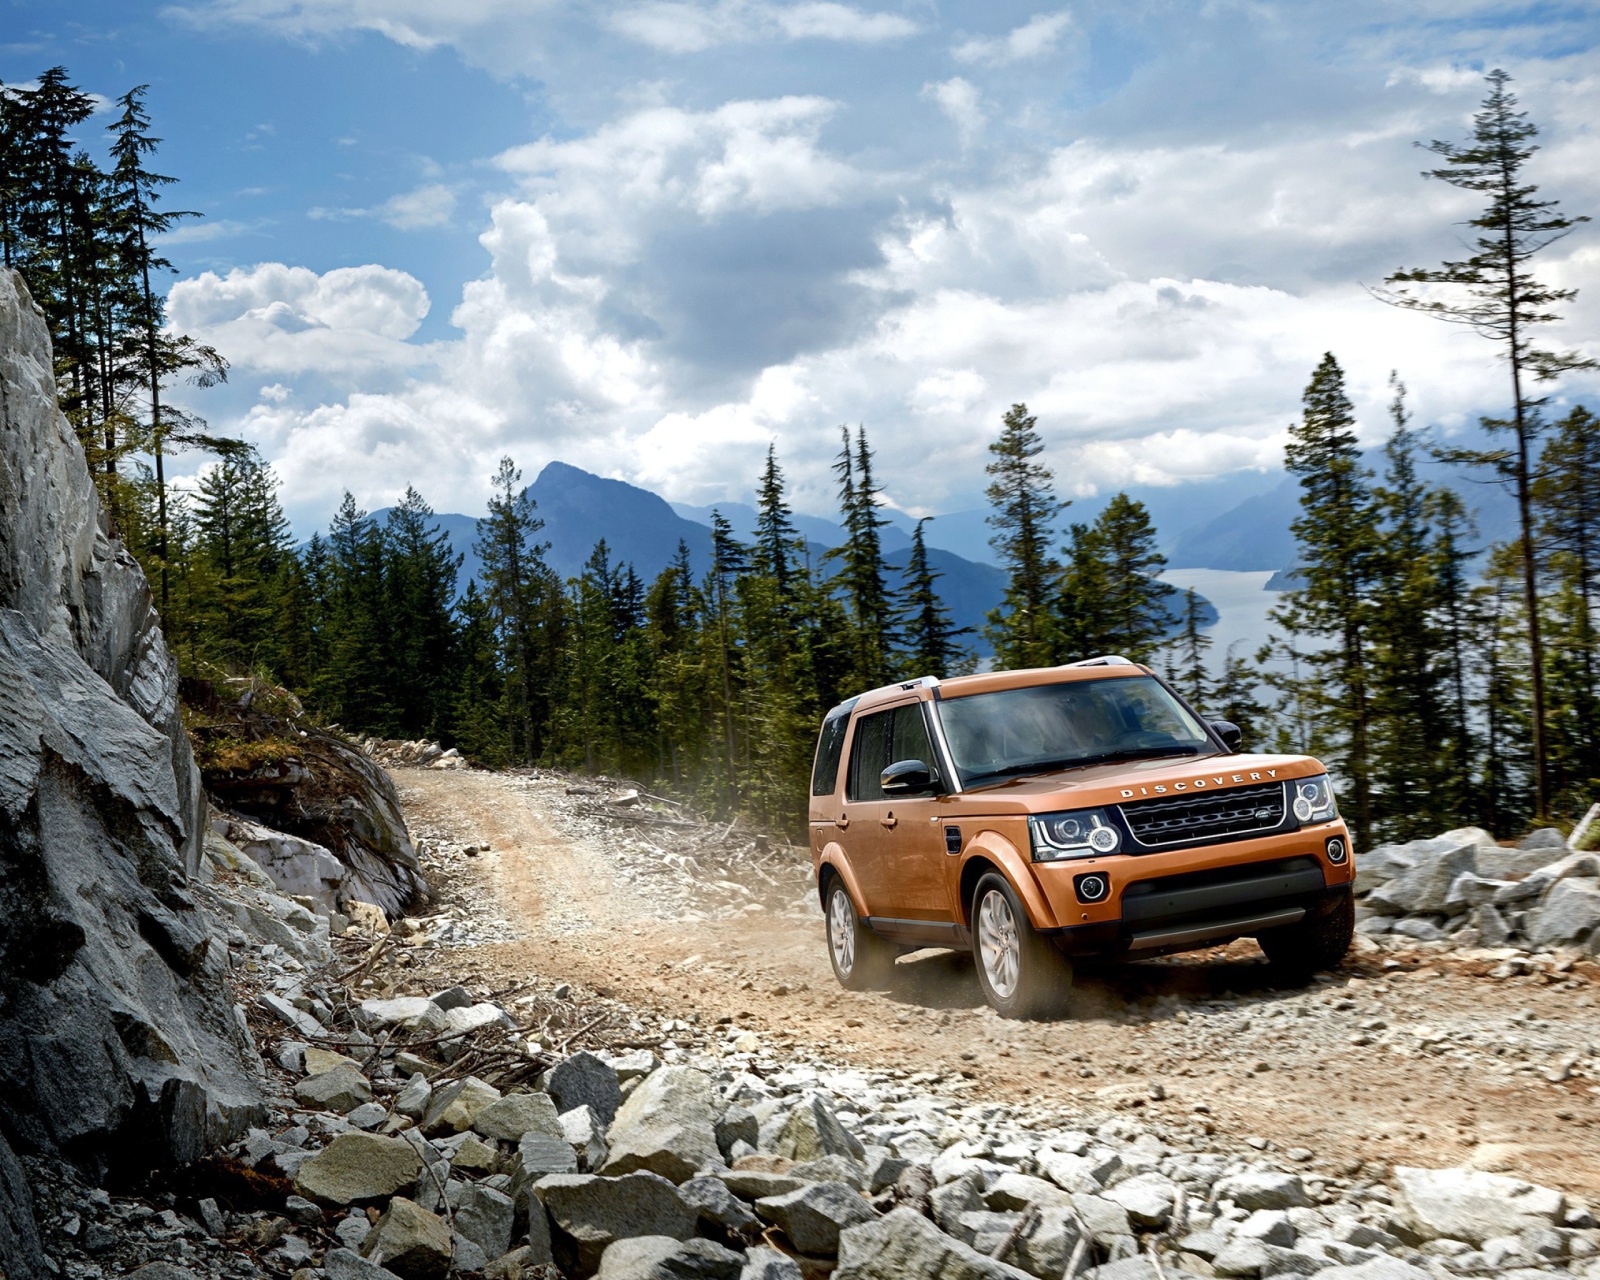 Land Rover Discovery wallpaper 1600x1280